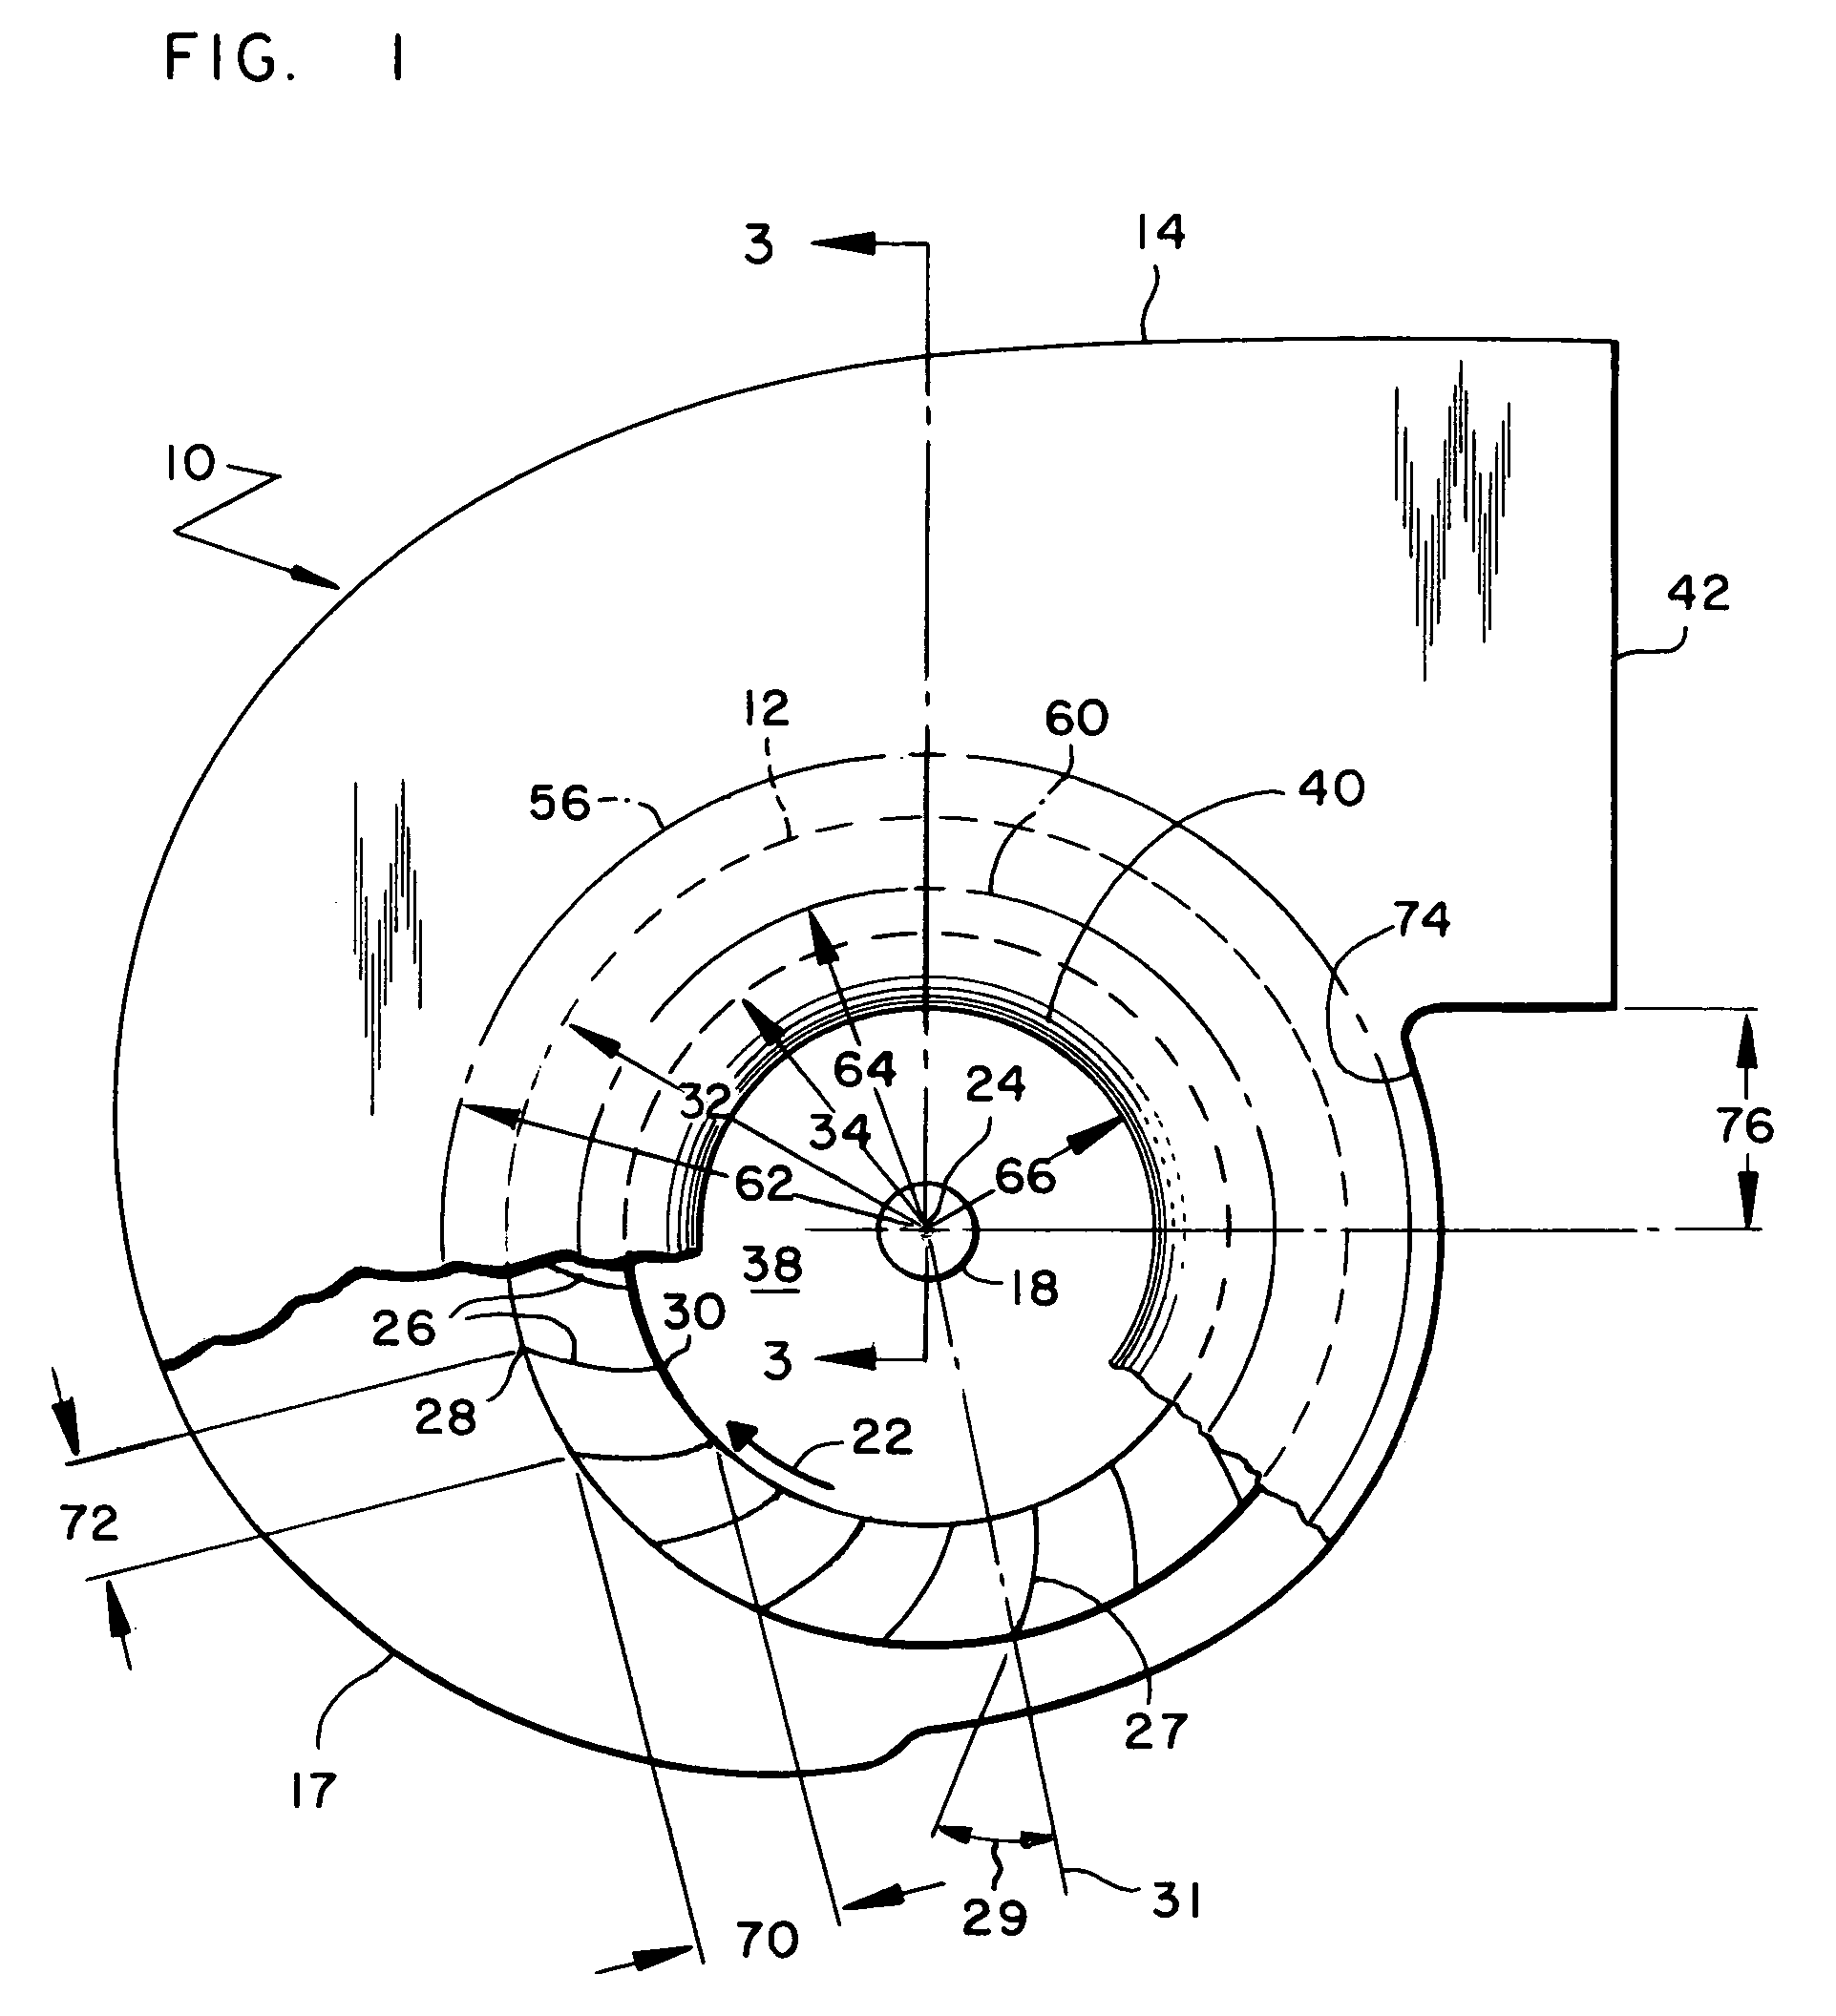 Fan inlet and housing for a centrifugal blower whose impeller has forward curved fan blades